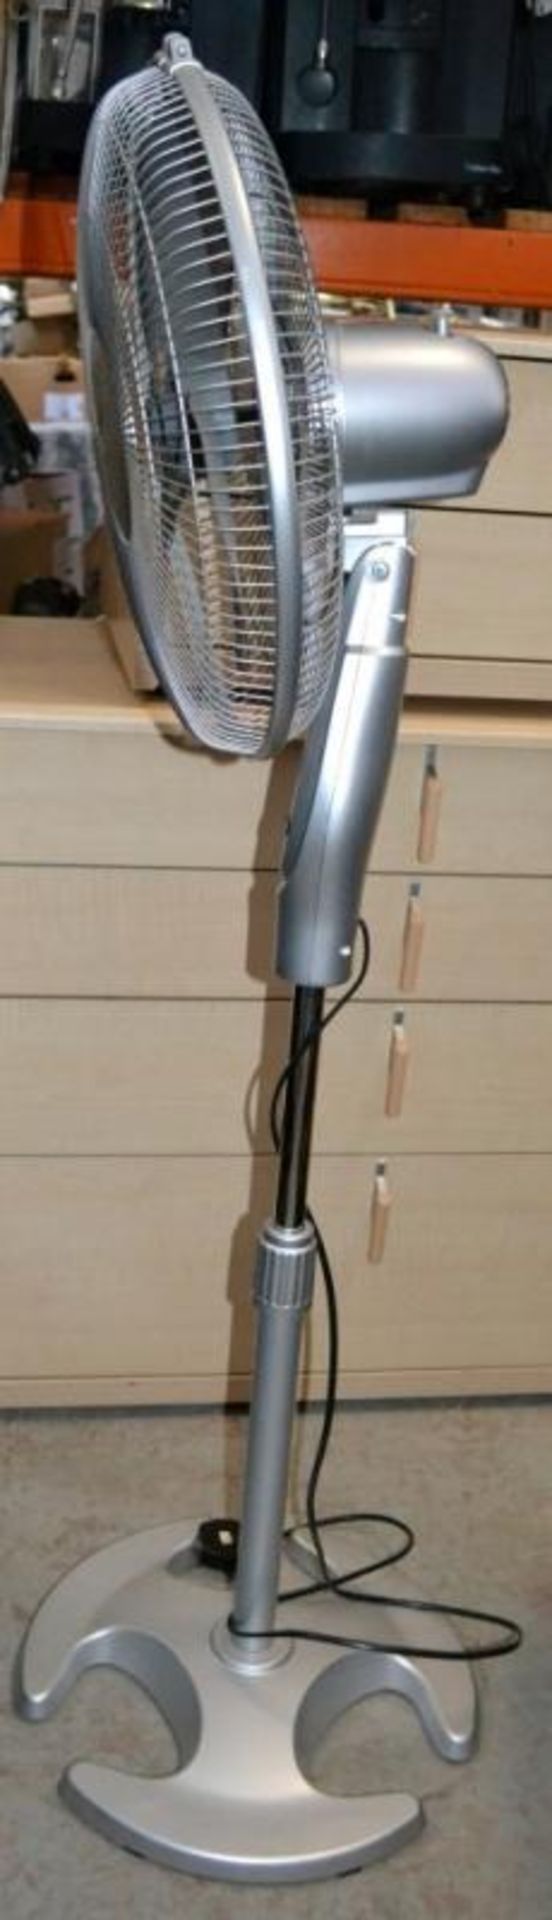 1 x Freestanding Pedestal Fan - Height Adjustable - Ref: MT937 - Used, In Good Working Condition - C - Image 2 of 3